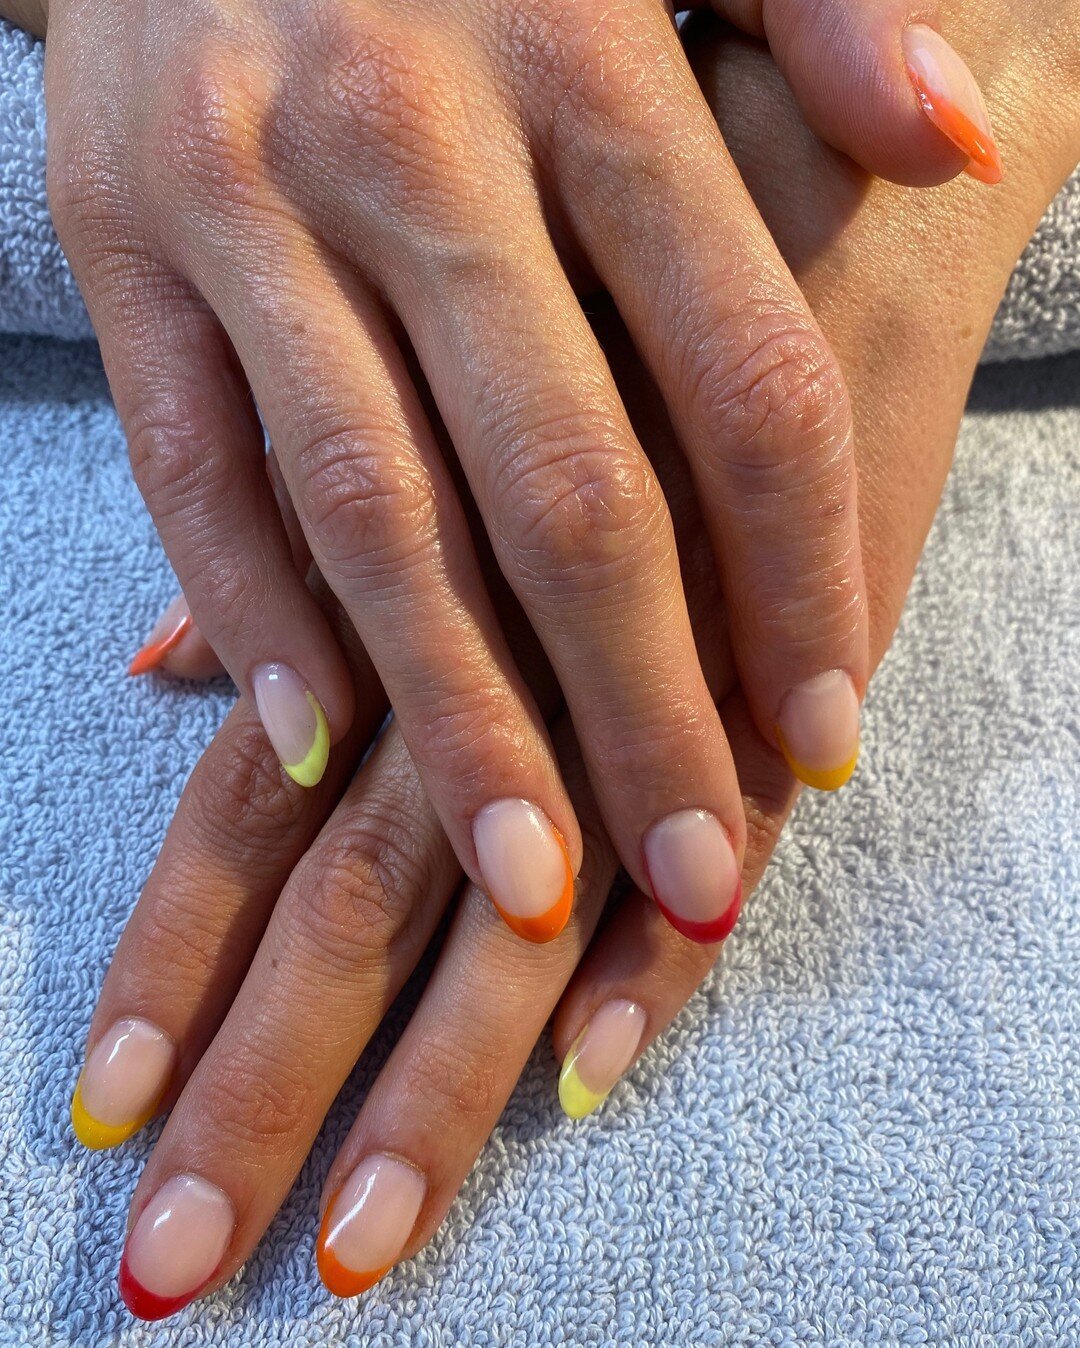 Making the most of Autumn 🍁🍂 ​​​​​​​​
​​​​​​​​
Gel extensions and french tips using @the_gelbottle_inc Papaya, Butternut, Pumpkin, Candy, Vixen ❤️ ​​​​​​​​
​​​​​​​​
There&rsquo;s still time to book in your Autumnal gel manicure with us before Winte